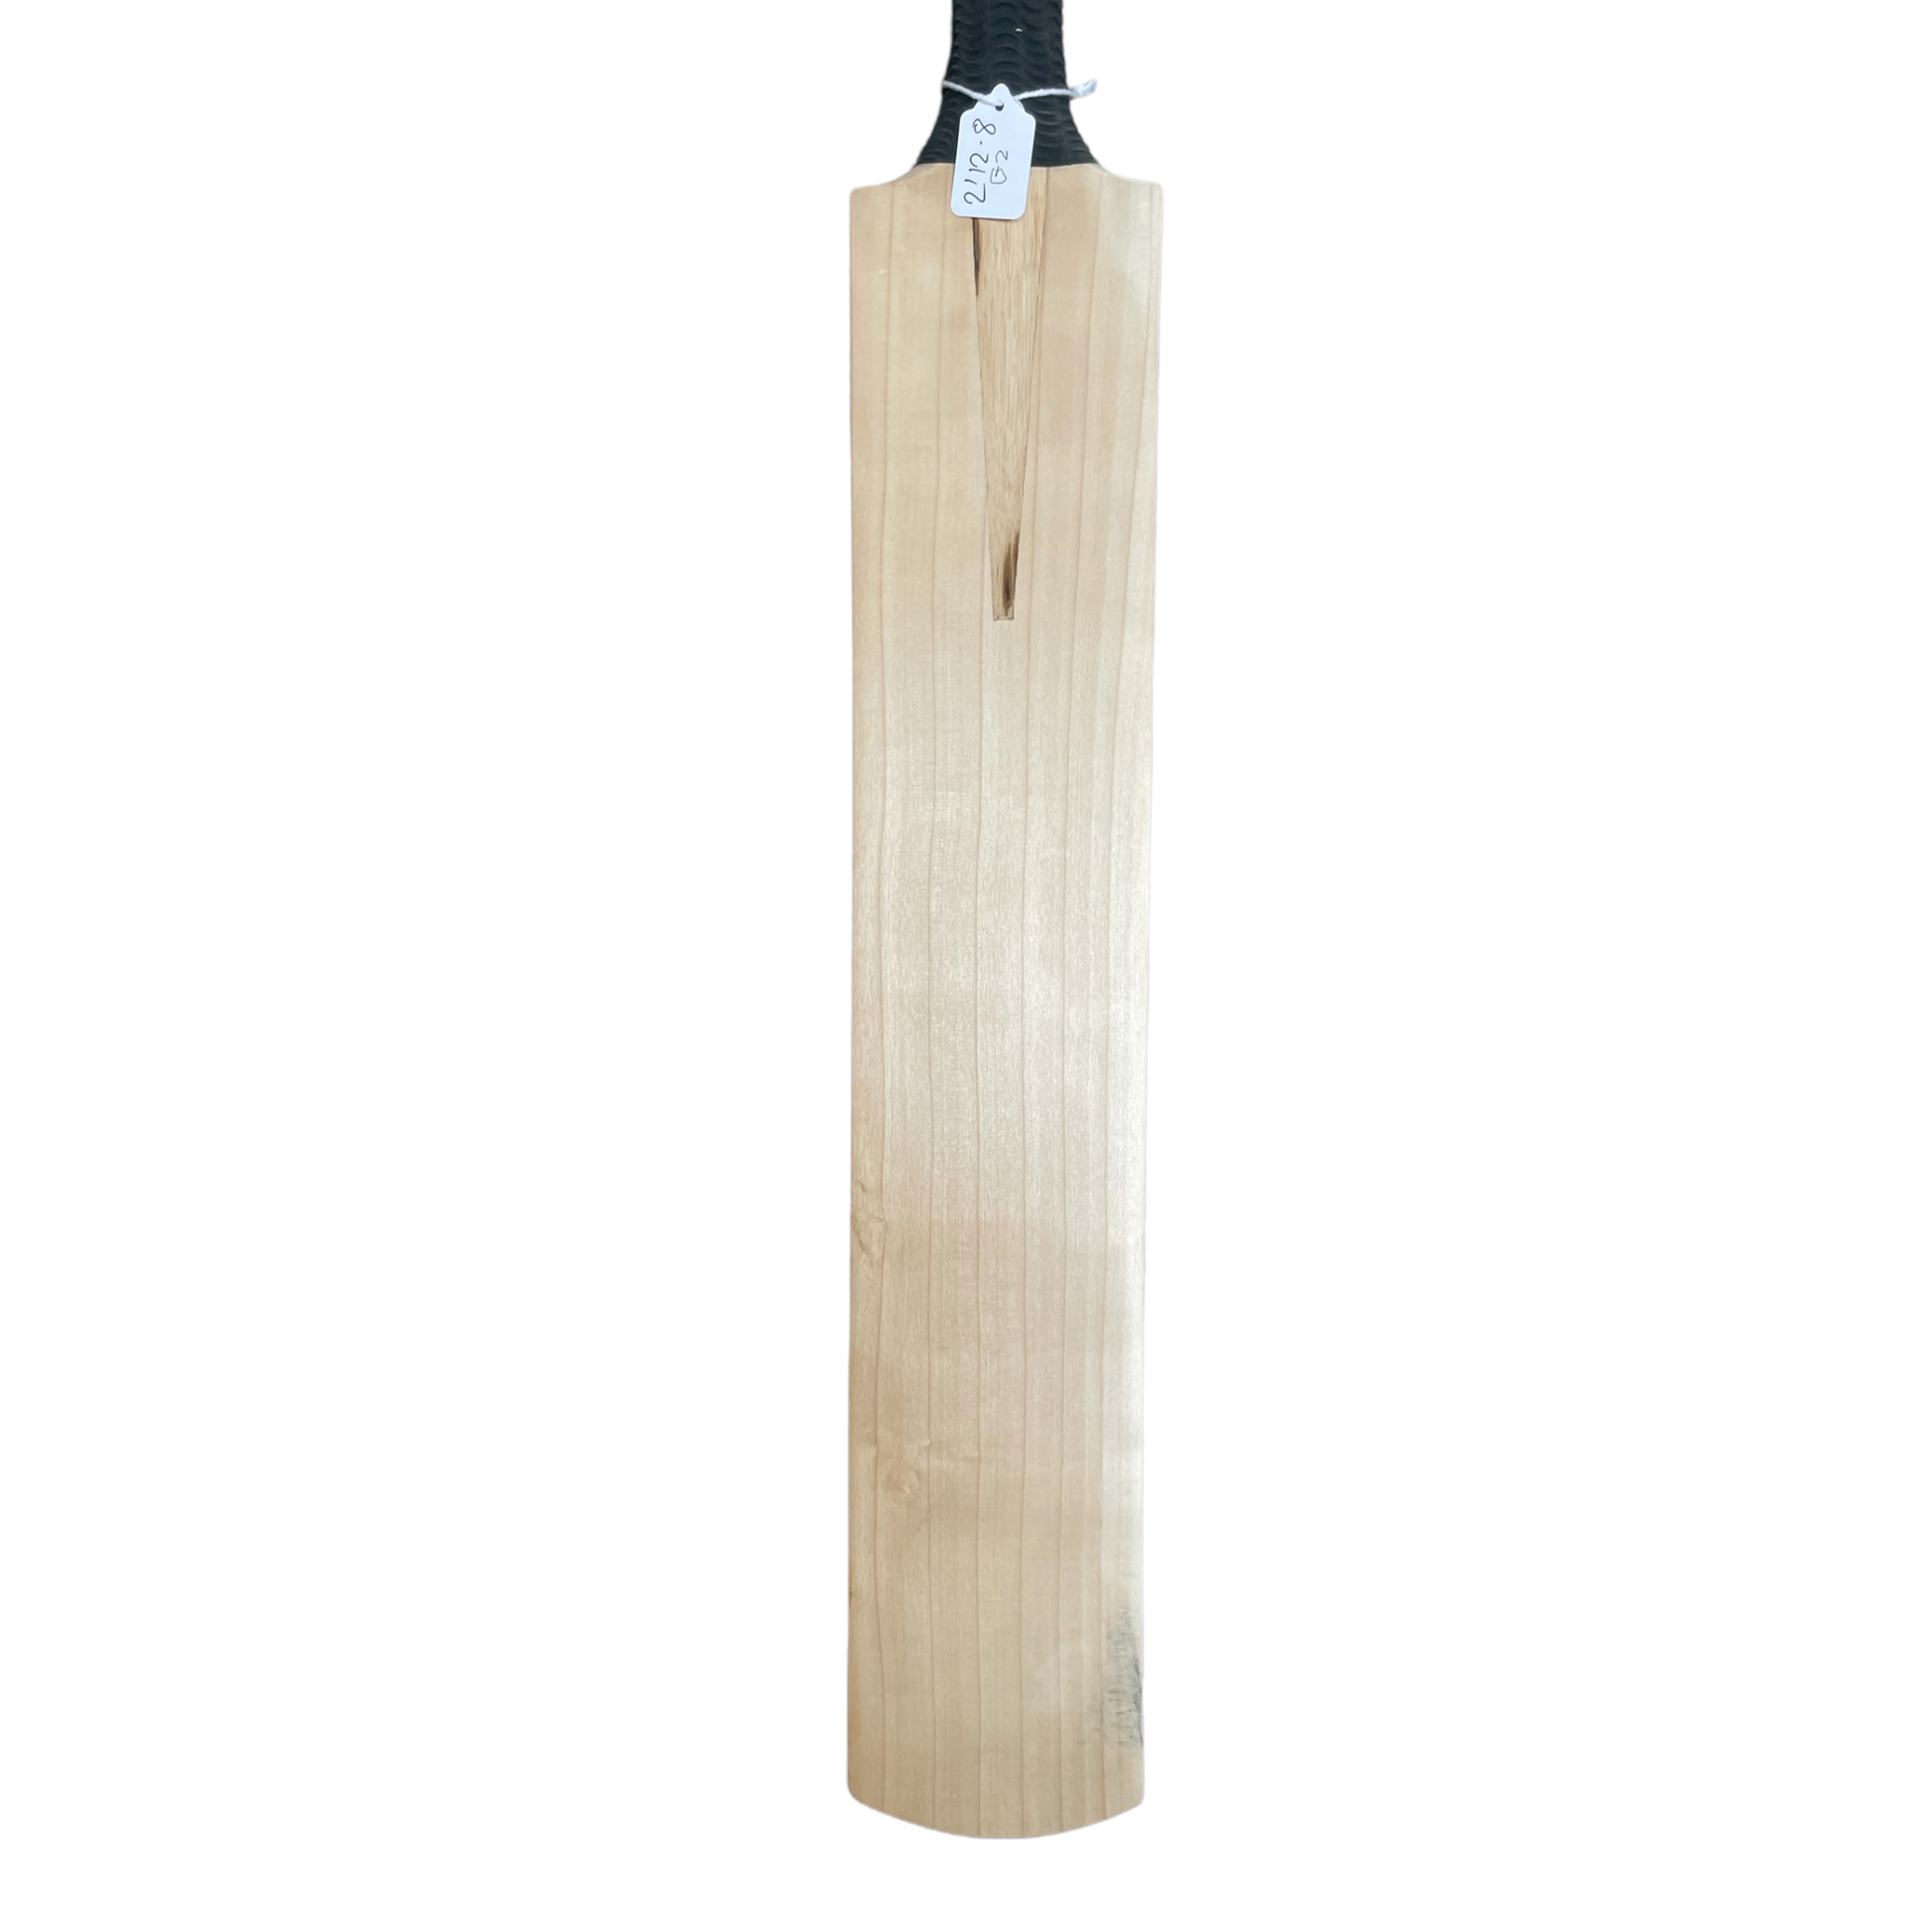 Plain Handmade English Willow Cricket Bats No stickers Discounted price Bargain Price Great deal Best price Lowest price Brighton and Hove Sussex Surrey hampshire Kent London Grade 2 